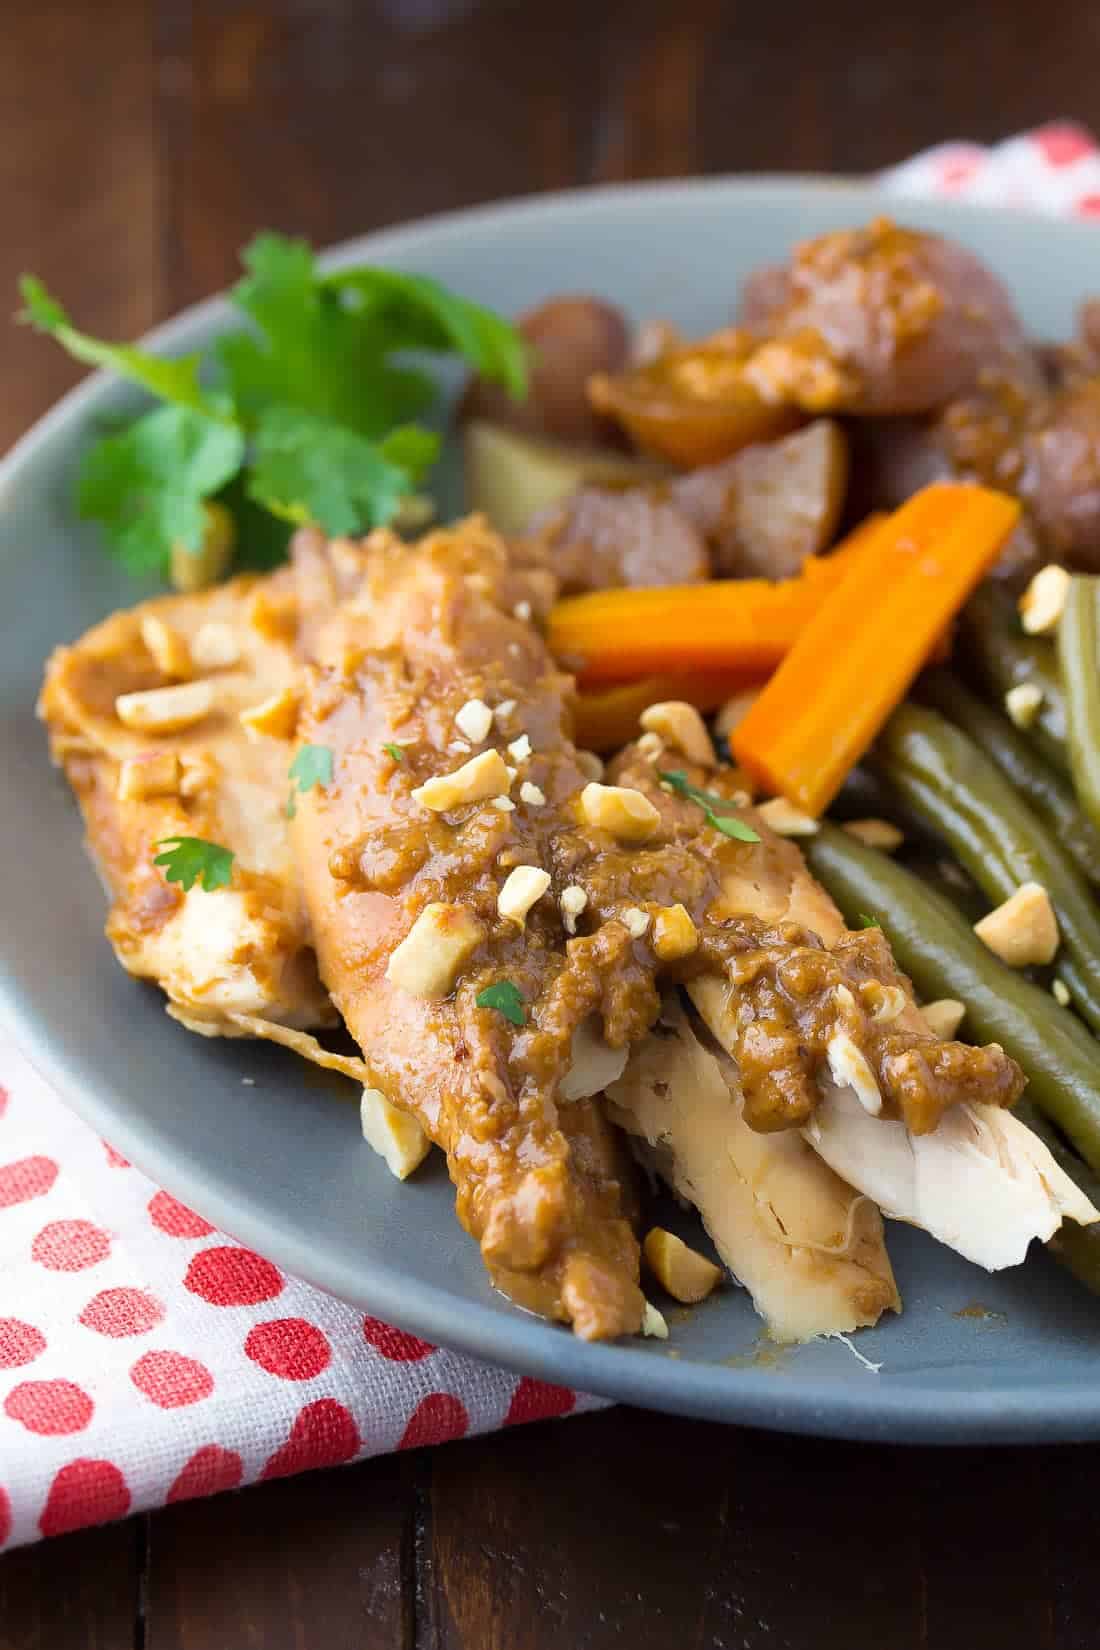 shredded peanut ginger chicken on a plate with the carrots, beans and potatoes